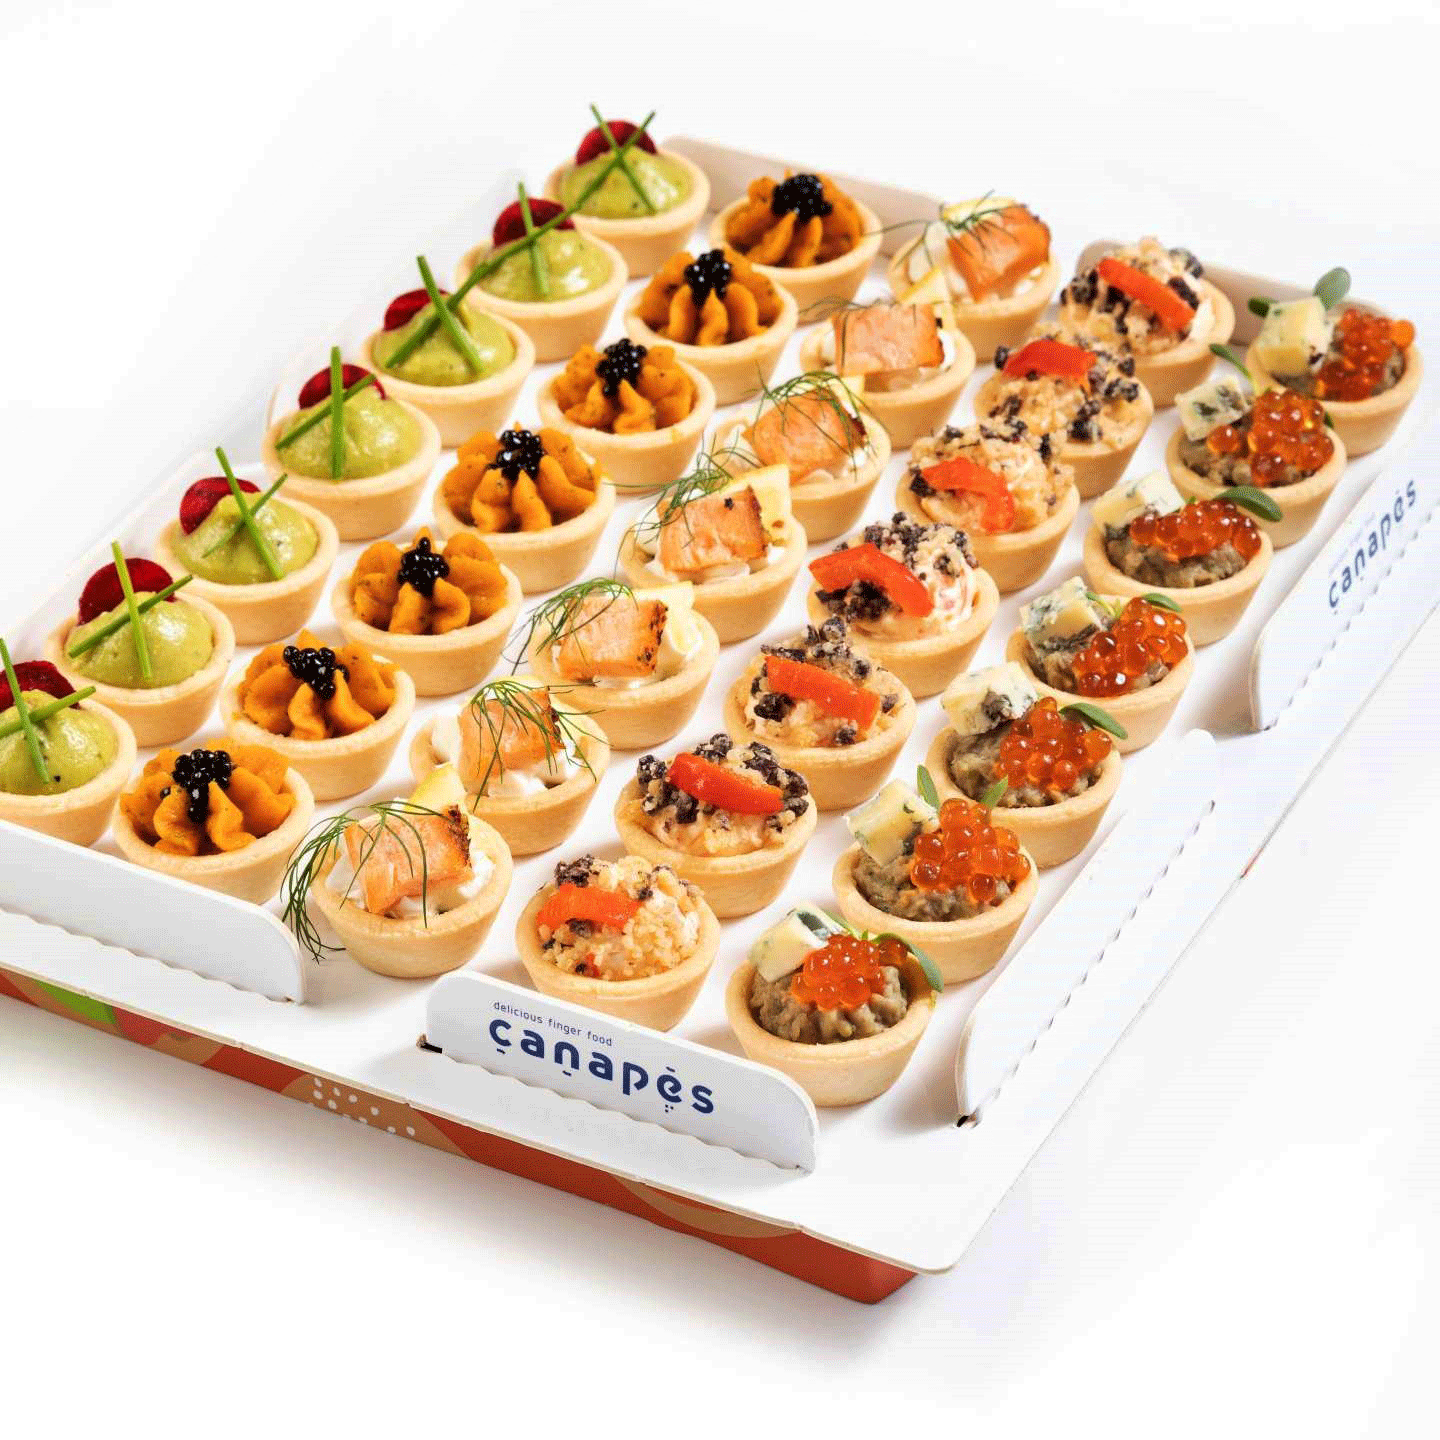 canapesusa.com for office catering